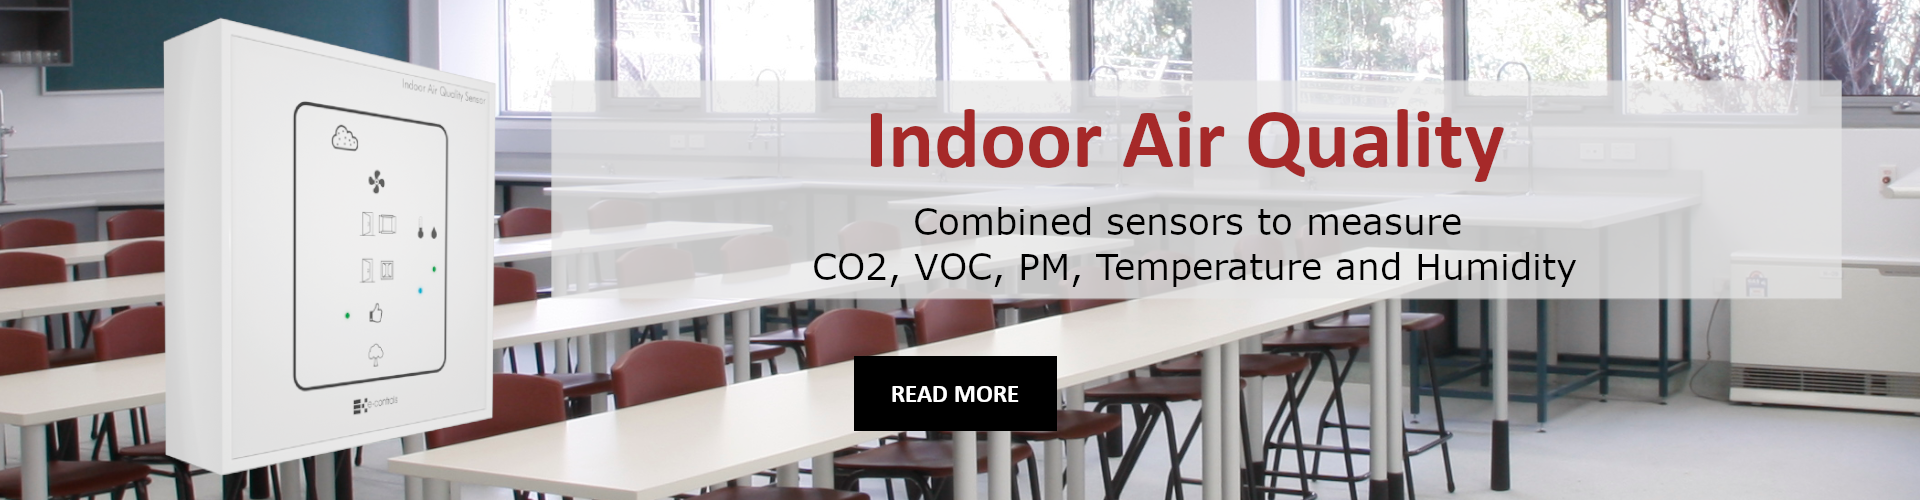 Indoor Air Quality Combined sensors to measure CO2, VOC, PM, Temperature and Humidity